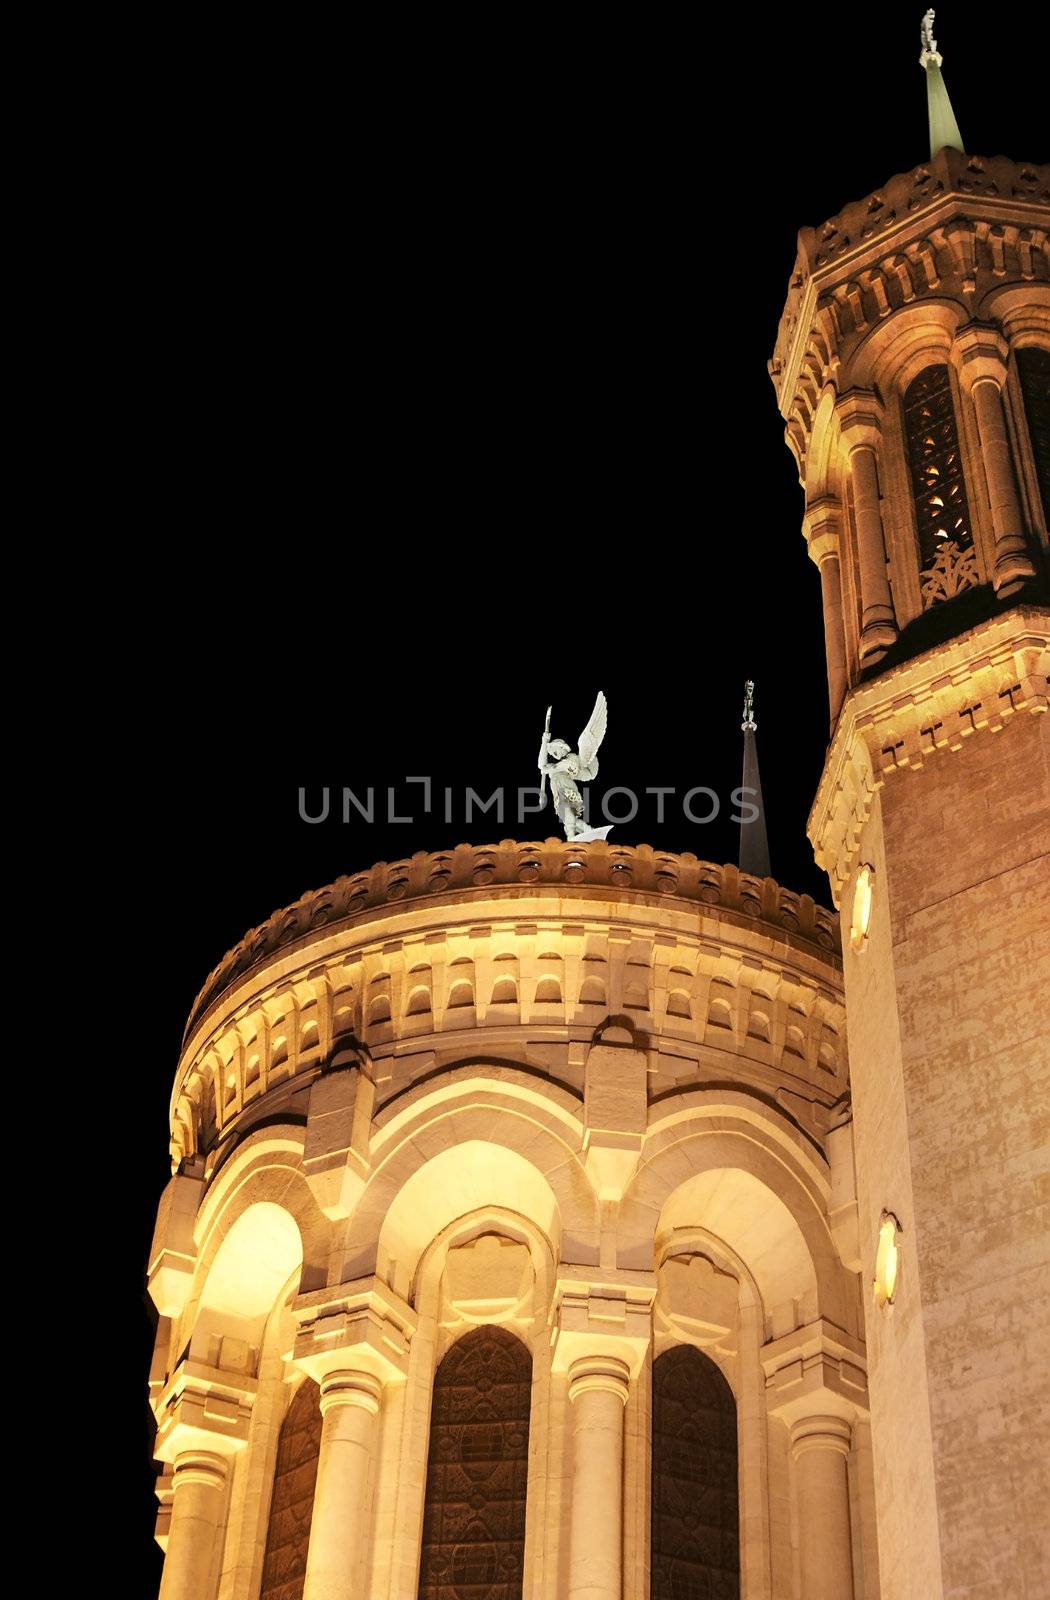 Basilica and angel at night by Mirage3